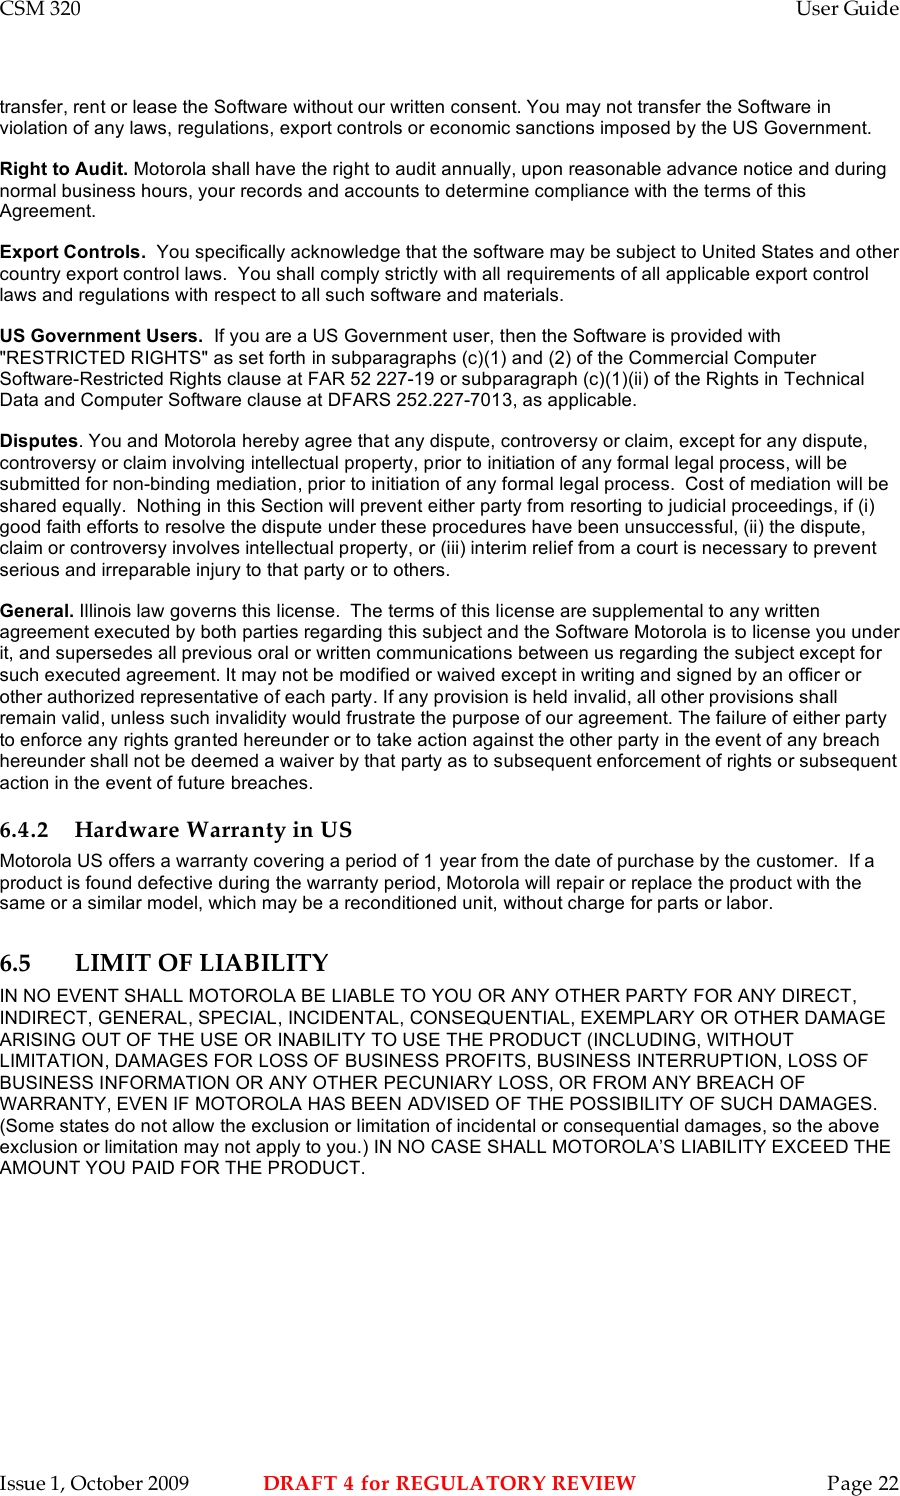 CSM 320    User Guide    Issue 1, October 2009  DRAFT 4 for REGULATORY REVIEW  Page 22 transfer, rent or lease the Software without our written consent. You may not transfer the Software in violation of any laws, regulations, export controls or economic sanctions imposed by the US Government. Right to Audit. Motorola shall have the right to audit annually, upon reasonable advance notice and during normal business hours, your records and accounts to determine compliance with the terms of this Agreement.  Export Controls.  You specifically acknowledge that the software may be subject to United States and other country export control laws.  You shall comply strictly with all requirements of all applicable export control laws and regulations with respect to all such software and materials. US Government Users.  If you are a US Government user, then the Software is provided with &quot;RESTRICTED RIGHTS&quot; as set forth in subparagraphs (c)(1) and (2) of the Commercial Computer Software-Restricted Rights clause at FAR 52 227-19 or subparagraph (c)(1)(ii) of the Rights in Technical Data and Computer Software clause at DFARS 252.227-7013, as applicable. Disputes. You and Motorola hereby agree that any dispute, controversy or claim, except for any dispute, controversy or claim involving intellectual property, prior to initiation of any formal legal process, will be submitted for non-binding mediation, prior to initiation of any formal legal process.  Cost of mediation will be shared equally.  Nothing in this Section will prevent either party from resorting to judicial proceedings, if (i) good faith efforts to resolve the dispute under these procedures have been unsuccessful, (ii) the dispute, claim or controversy involves intellectual property, or (iii) interim relief from a court is necessary to prevent serious and irreparable injury to that party or to others. General. Illinois law governs this license.  The terms of this license are supplemental to any written agreement executed by both parties regarding this subject and the Software Motorola is to license you under it, and supersedes all previous oral or written communications between us regarding the subject except for such executed agreement. It may not be modified or waived except in writing and signed by an officer or other authorized representative of each party. If any provision is held invalid, all other provisions shall remain valid, unless such invalidity would frustrate the purpose of our agreement. The failure of either party to enforce any rights granted hereunder or to take action against the other party in the event of any breach hereunder shall not be deemed a waiver by that party as to subsequent enforcement of rights or subsequent action in the event of future breaches. 6.4.2 Hardware Warranty in US Motorola US offers a warranty covering a period of 1 year from the date of purchase by the customer.  If a product is found defective during the warranty period, Motorola will repair or replace the product with the same or a similar model, which may be a reconditioned unit, without charge for parts or labor.  6.5 LIMIT OF LIABILITY IN NO EVENT SHALL MOTOROLA BE LIABLE TO YOU OR ANY OTHER PARTY FOR ANY DIRECT, INDIRECT, GENERAL, SPECIAL, INCIDENTAL, CONSEQUENTIAL, EXEMPLARY OR OTHER DAMAGE ARISING OUT OF THE USE OR INABILITY TO USE THE PRODUCT (INCLUDING, WITHOUT LIMITATION, DAMAGES FOR LOSS OF BUSINESS PROFITS, BUSINESS INTERRUPTION, LOSS OF BUSINESS INFORMATION OR ANY OTHER PECUNIARY LOSS, OR FROM ANY BREACH OF WARRANTY, EVEN IF MOTOROLA HAS BEEN ADVISED OF THE POSSIBILITY OF SUCH DAMAGES. (Some states do not allow the exclusion or limitation of incidental or consequential damages, so the above exclusion or limitation may not apply to you.) IN NO CASE SHALL MOTOROLA’S LIABILITY EXCEED THE AMOUNT YOU PAID FOR THE PRODUCT. 